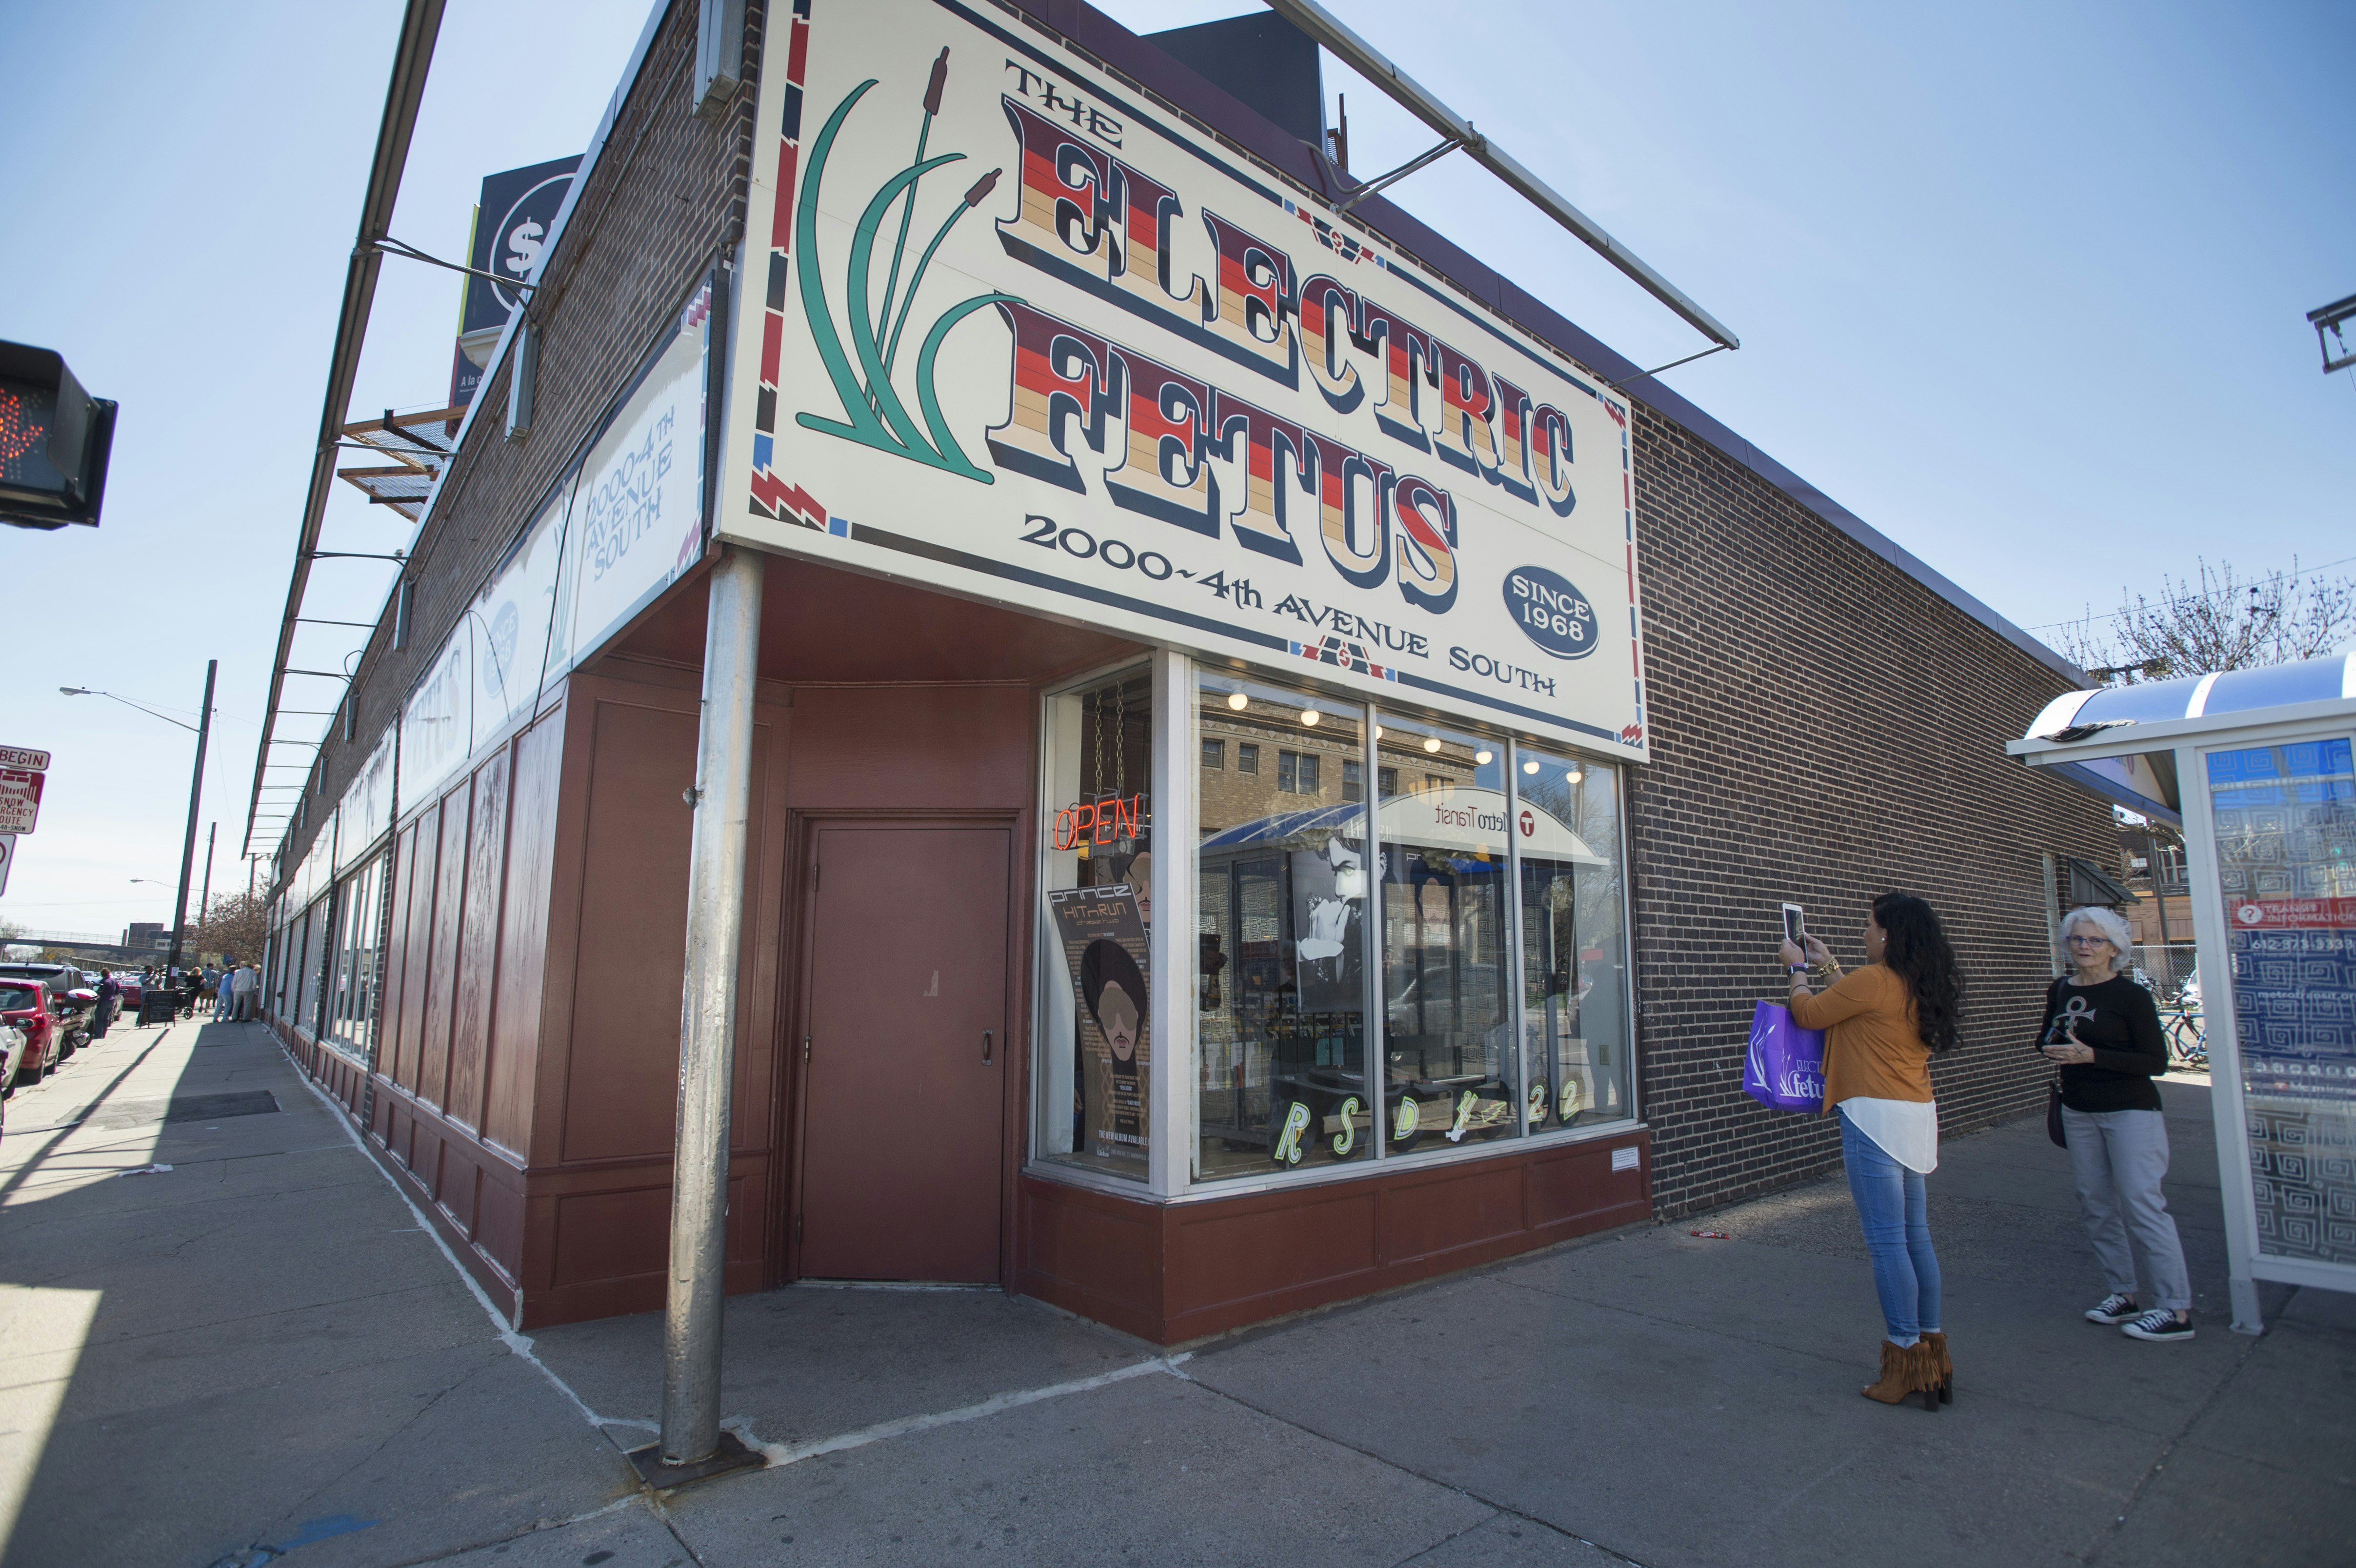 A woman in blue skinny jeans, brown booties, a white hi-lo top, and camel-colored sweater snaps a photo on her phone of the Electric Fetus building, a brick storefront with a large purple, orange, and tan 70s-style font and an illustration of cat tails with waving leaves.